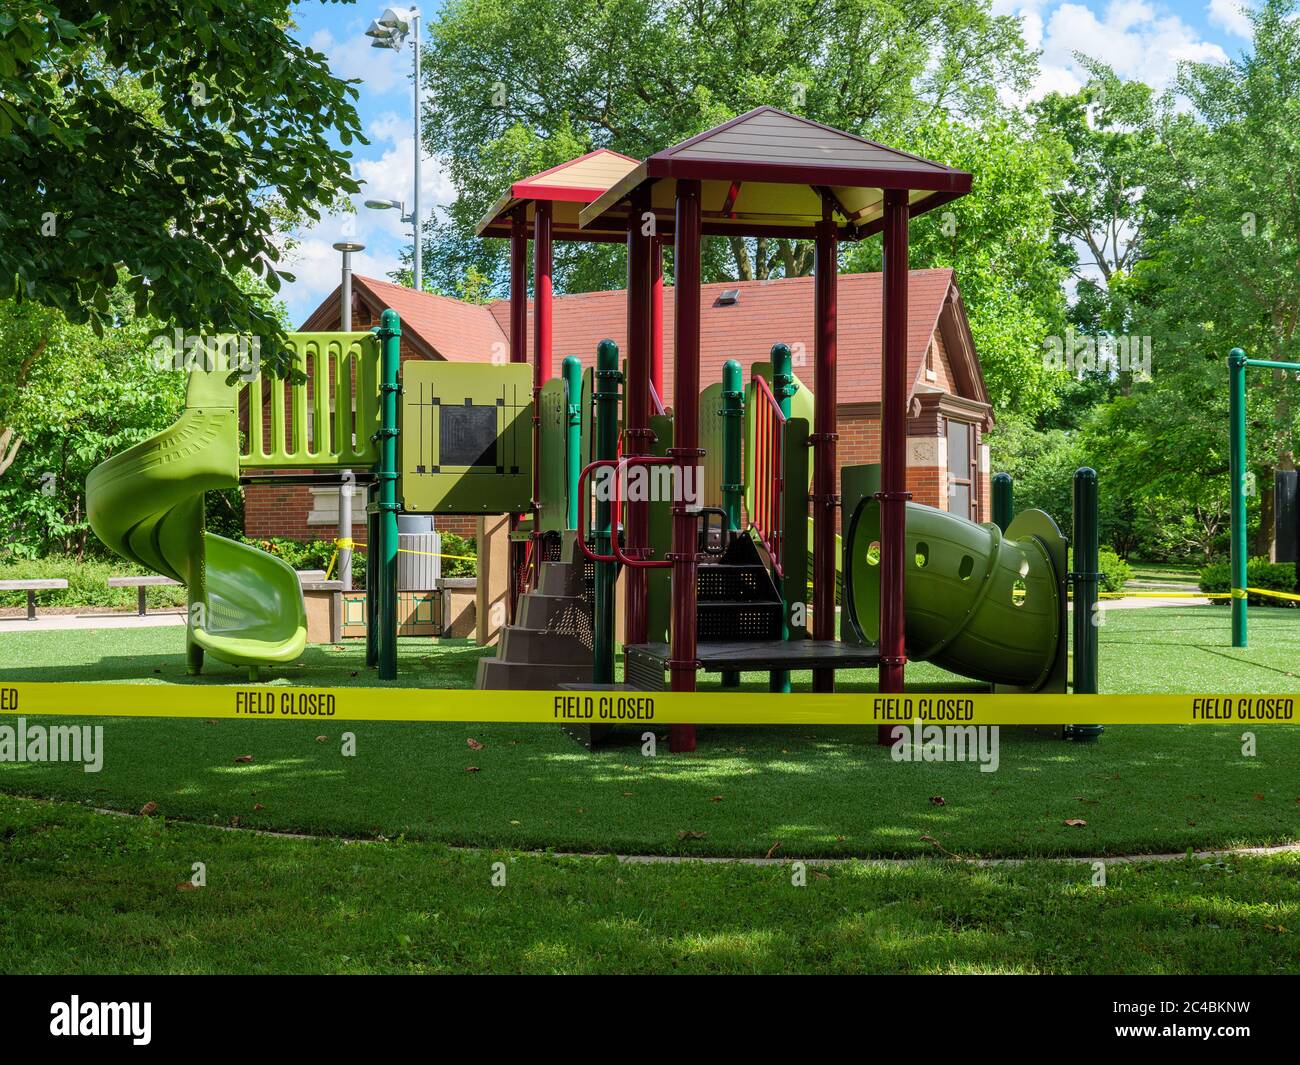 Playground taped off due to COVID-19. Oak Park, Illinois. Stock Photo